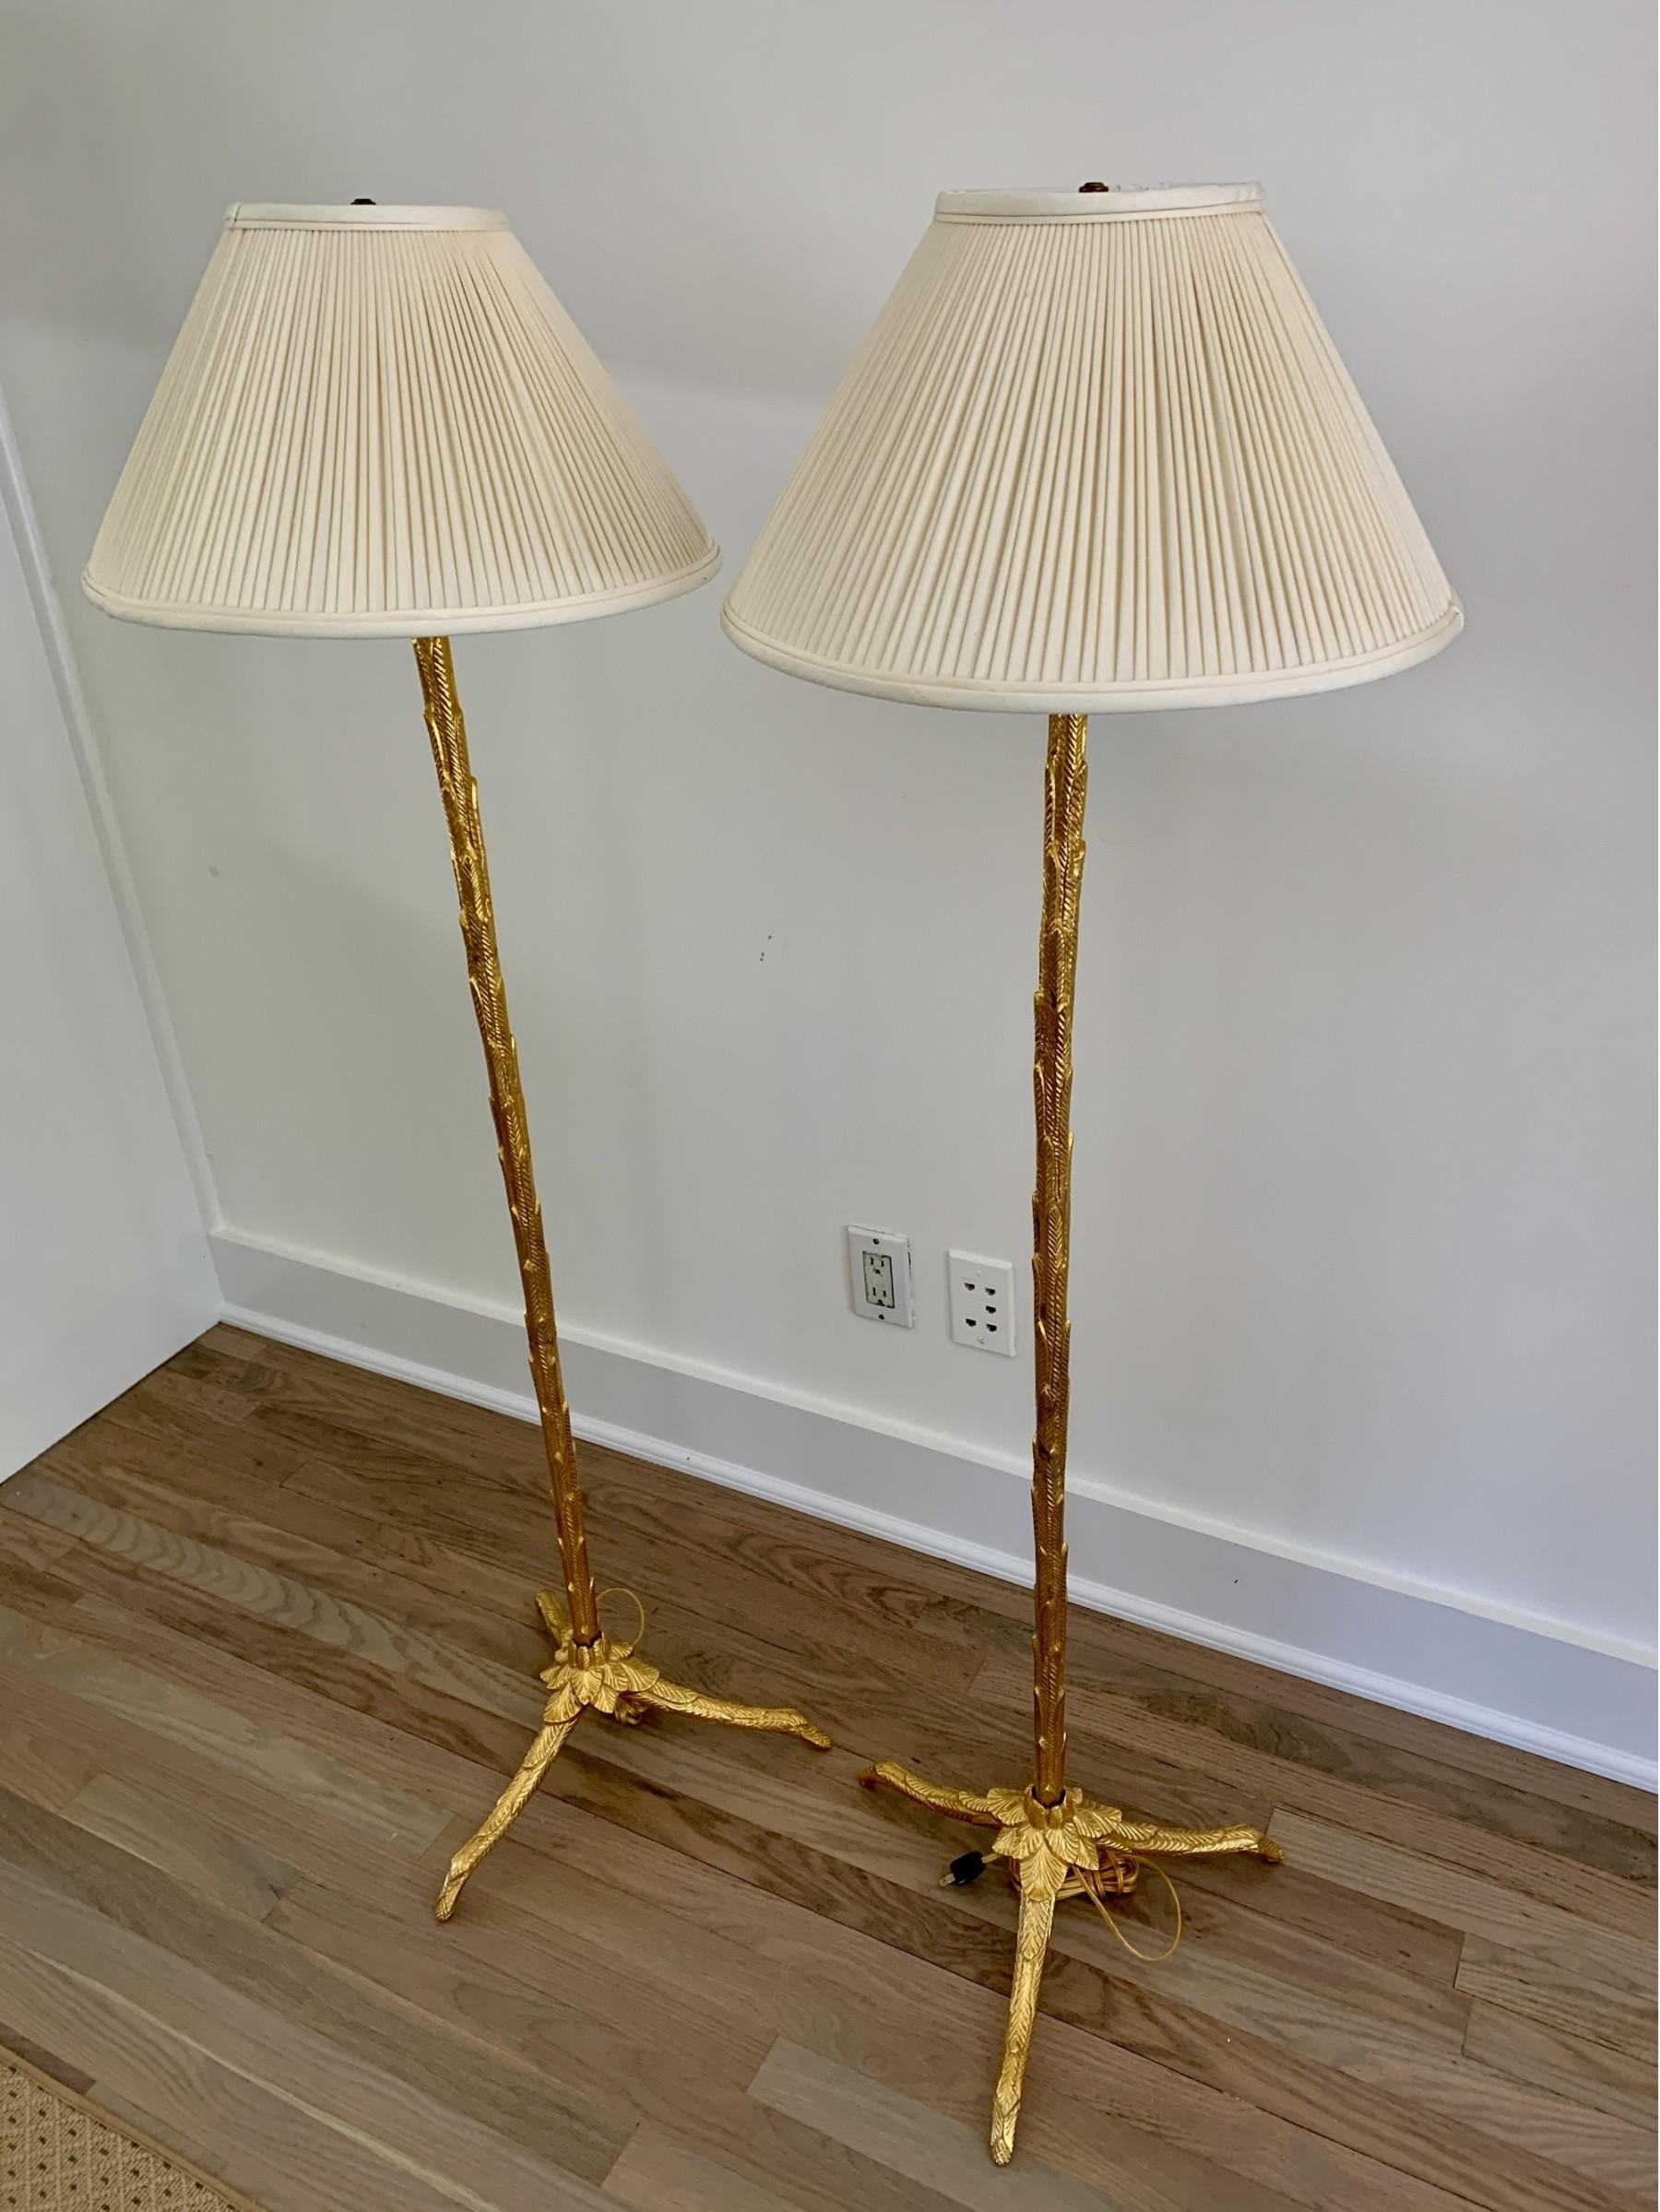 A fine pair of high quality solid gilt bronze floor lamps by Maison Baguès with palm leaf design, France, Circa 1960's.

Can be sold separately for $ 4,950 each.